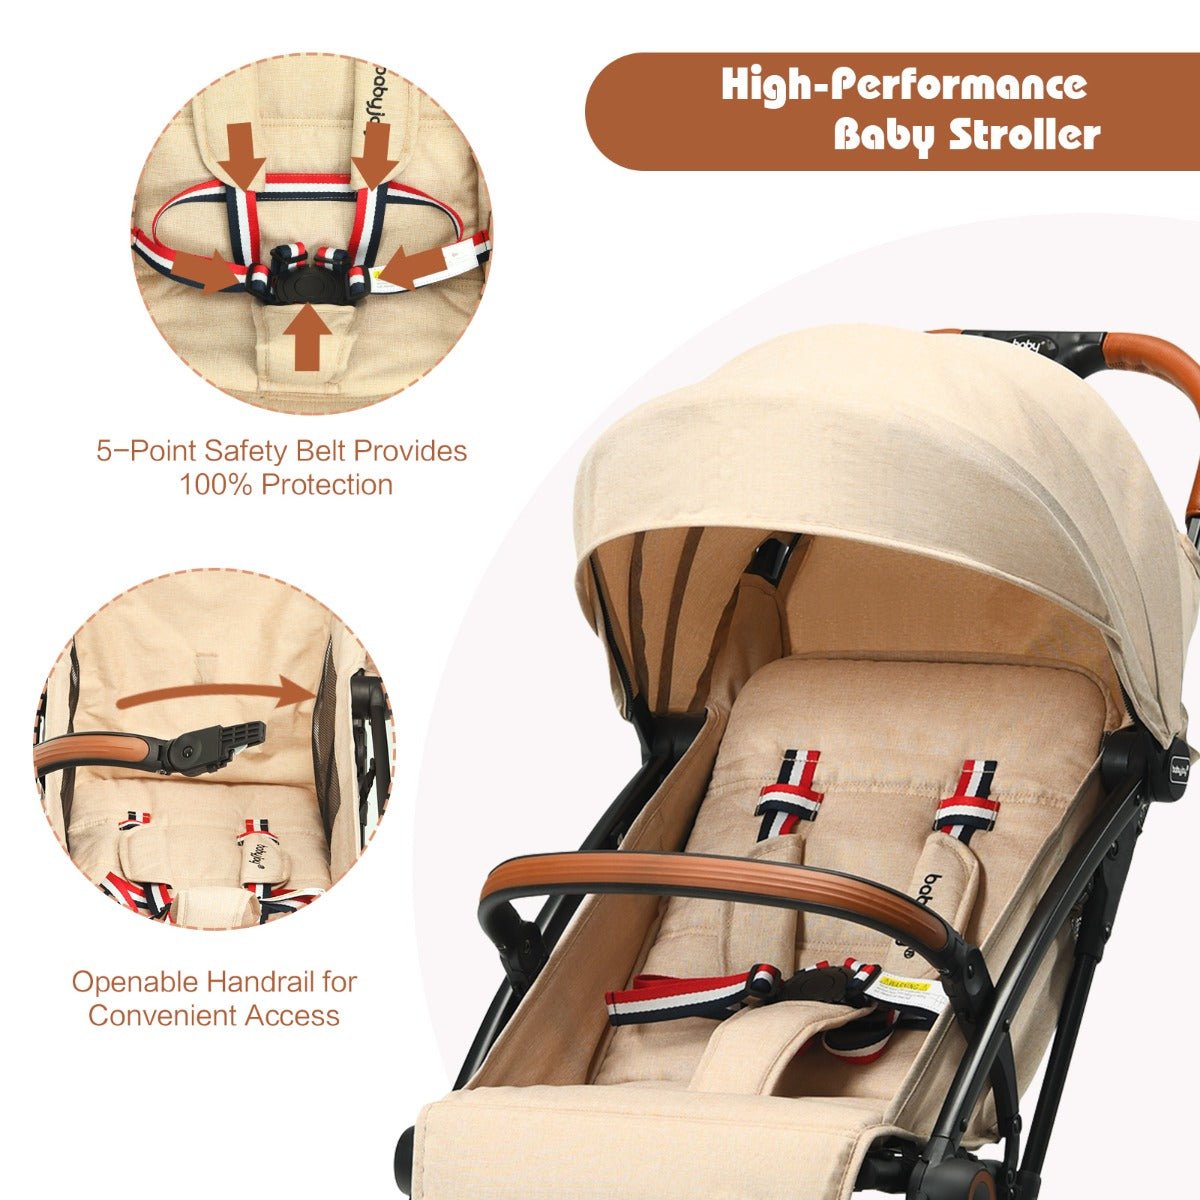 Beige Baby Stroller: Stylish and Functional